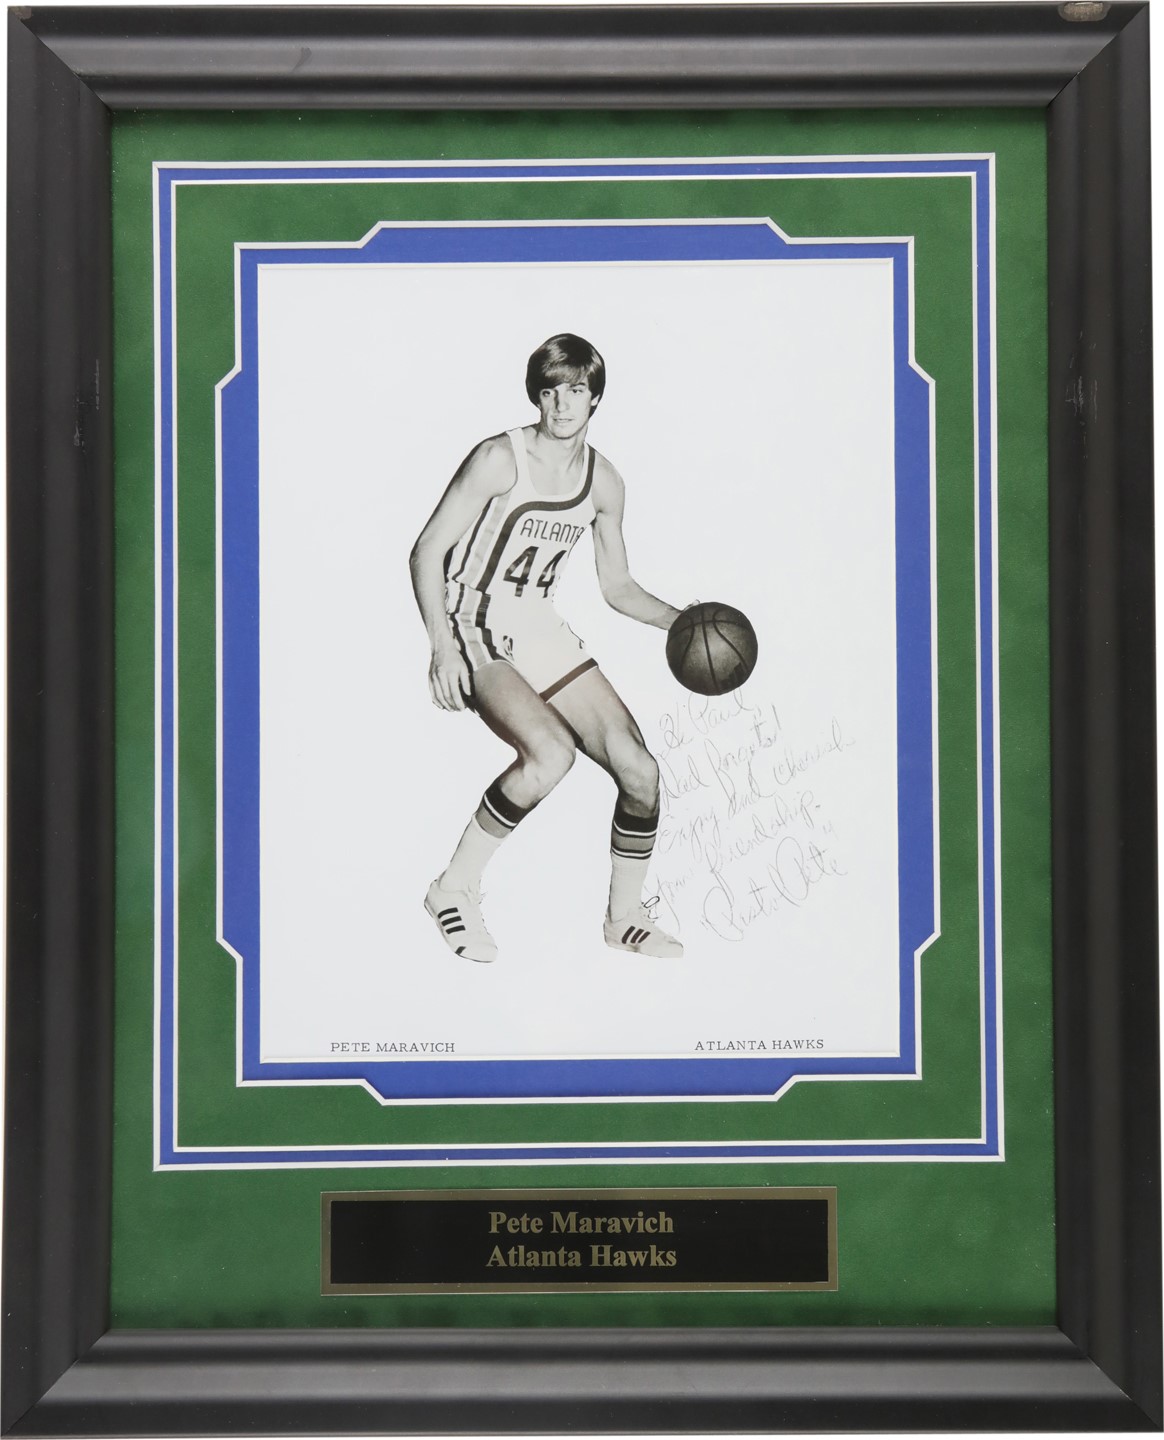 - Pete Maravich Signed Photograph with Signed Letter from Press Maravich